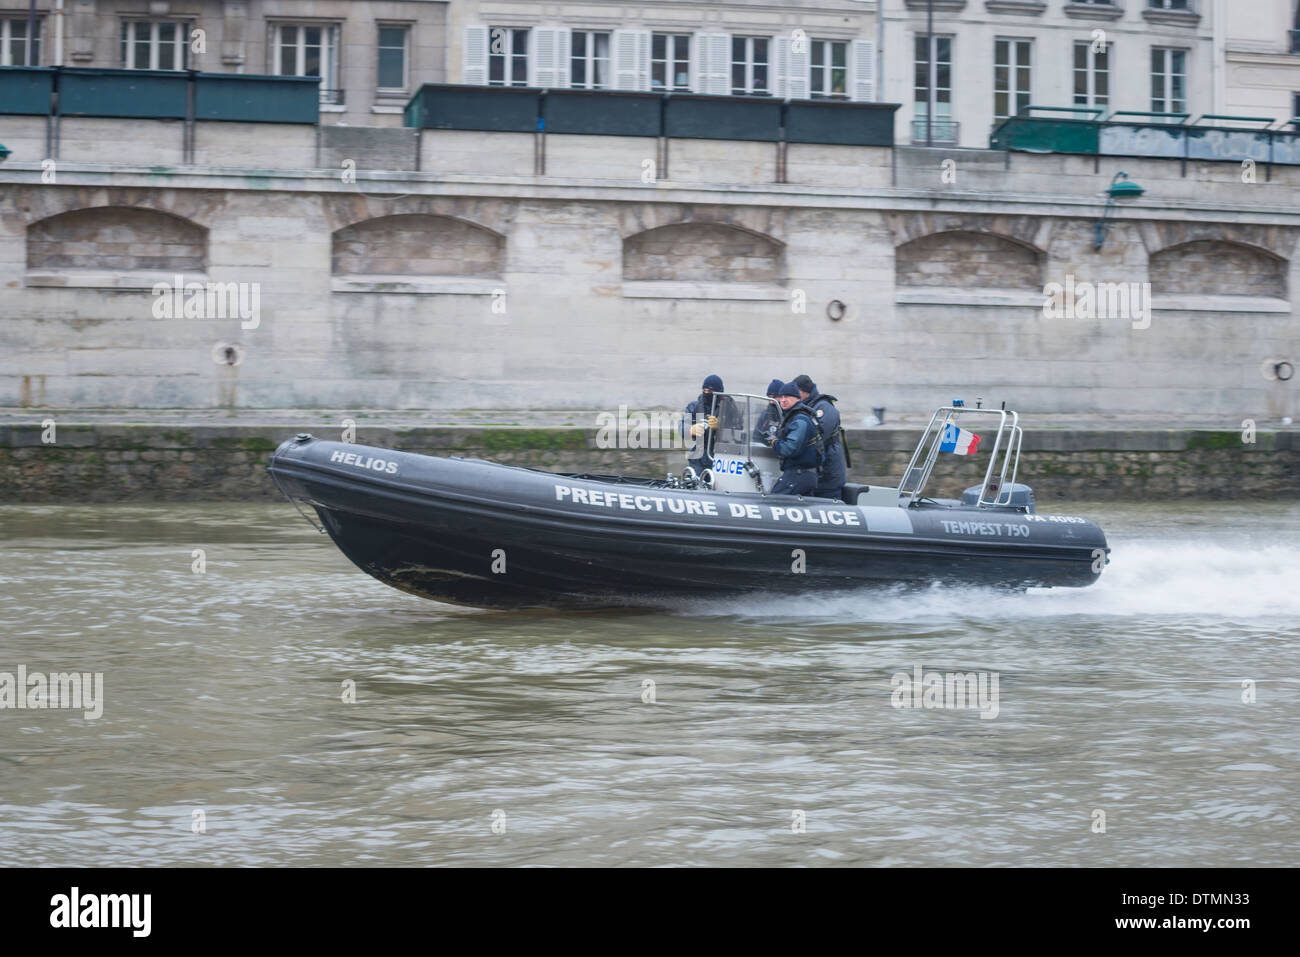 The Prefecture de police in a high powered rigid inflatable boat on the river Seine in Paris. Stock Photo